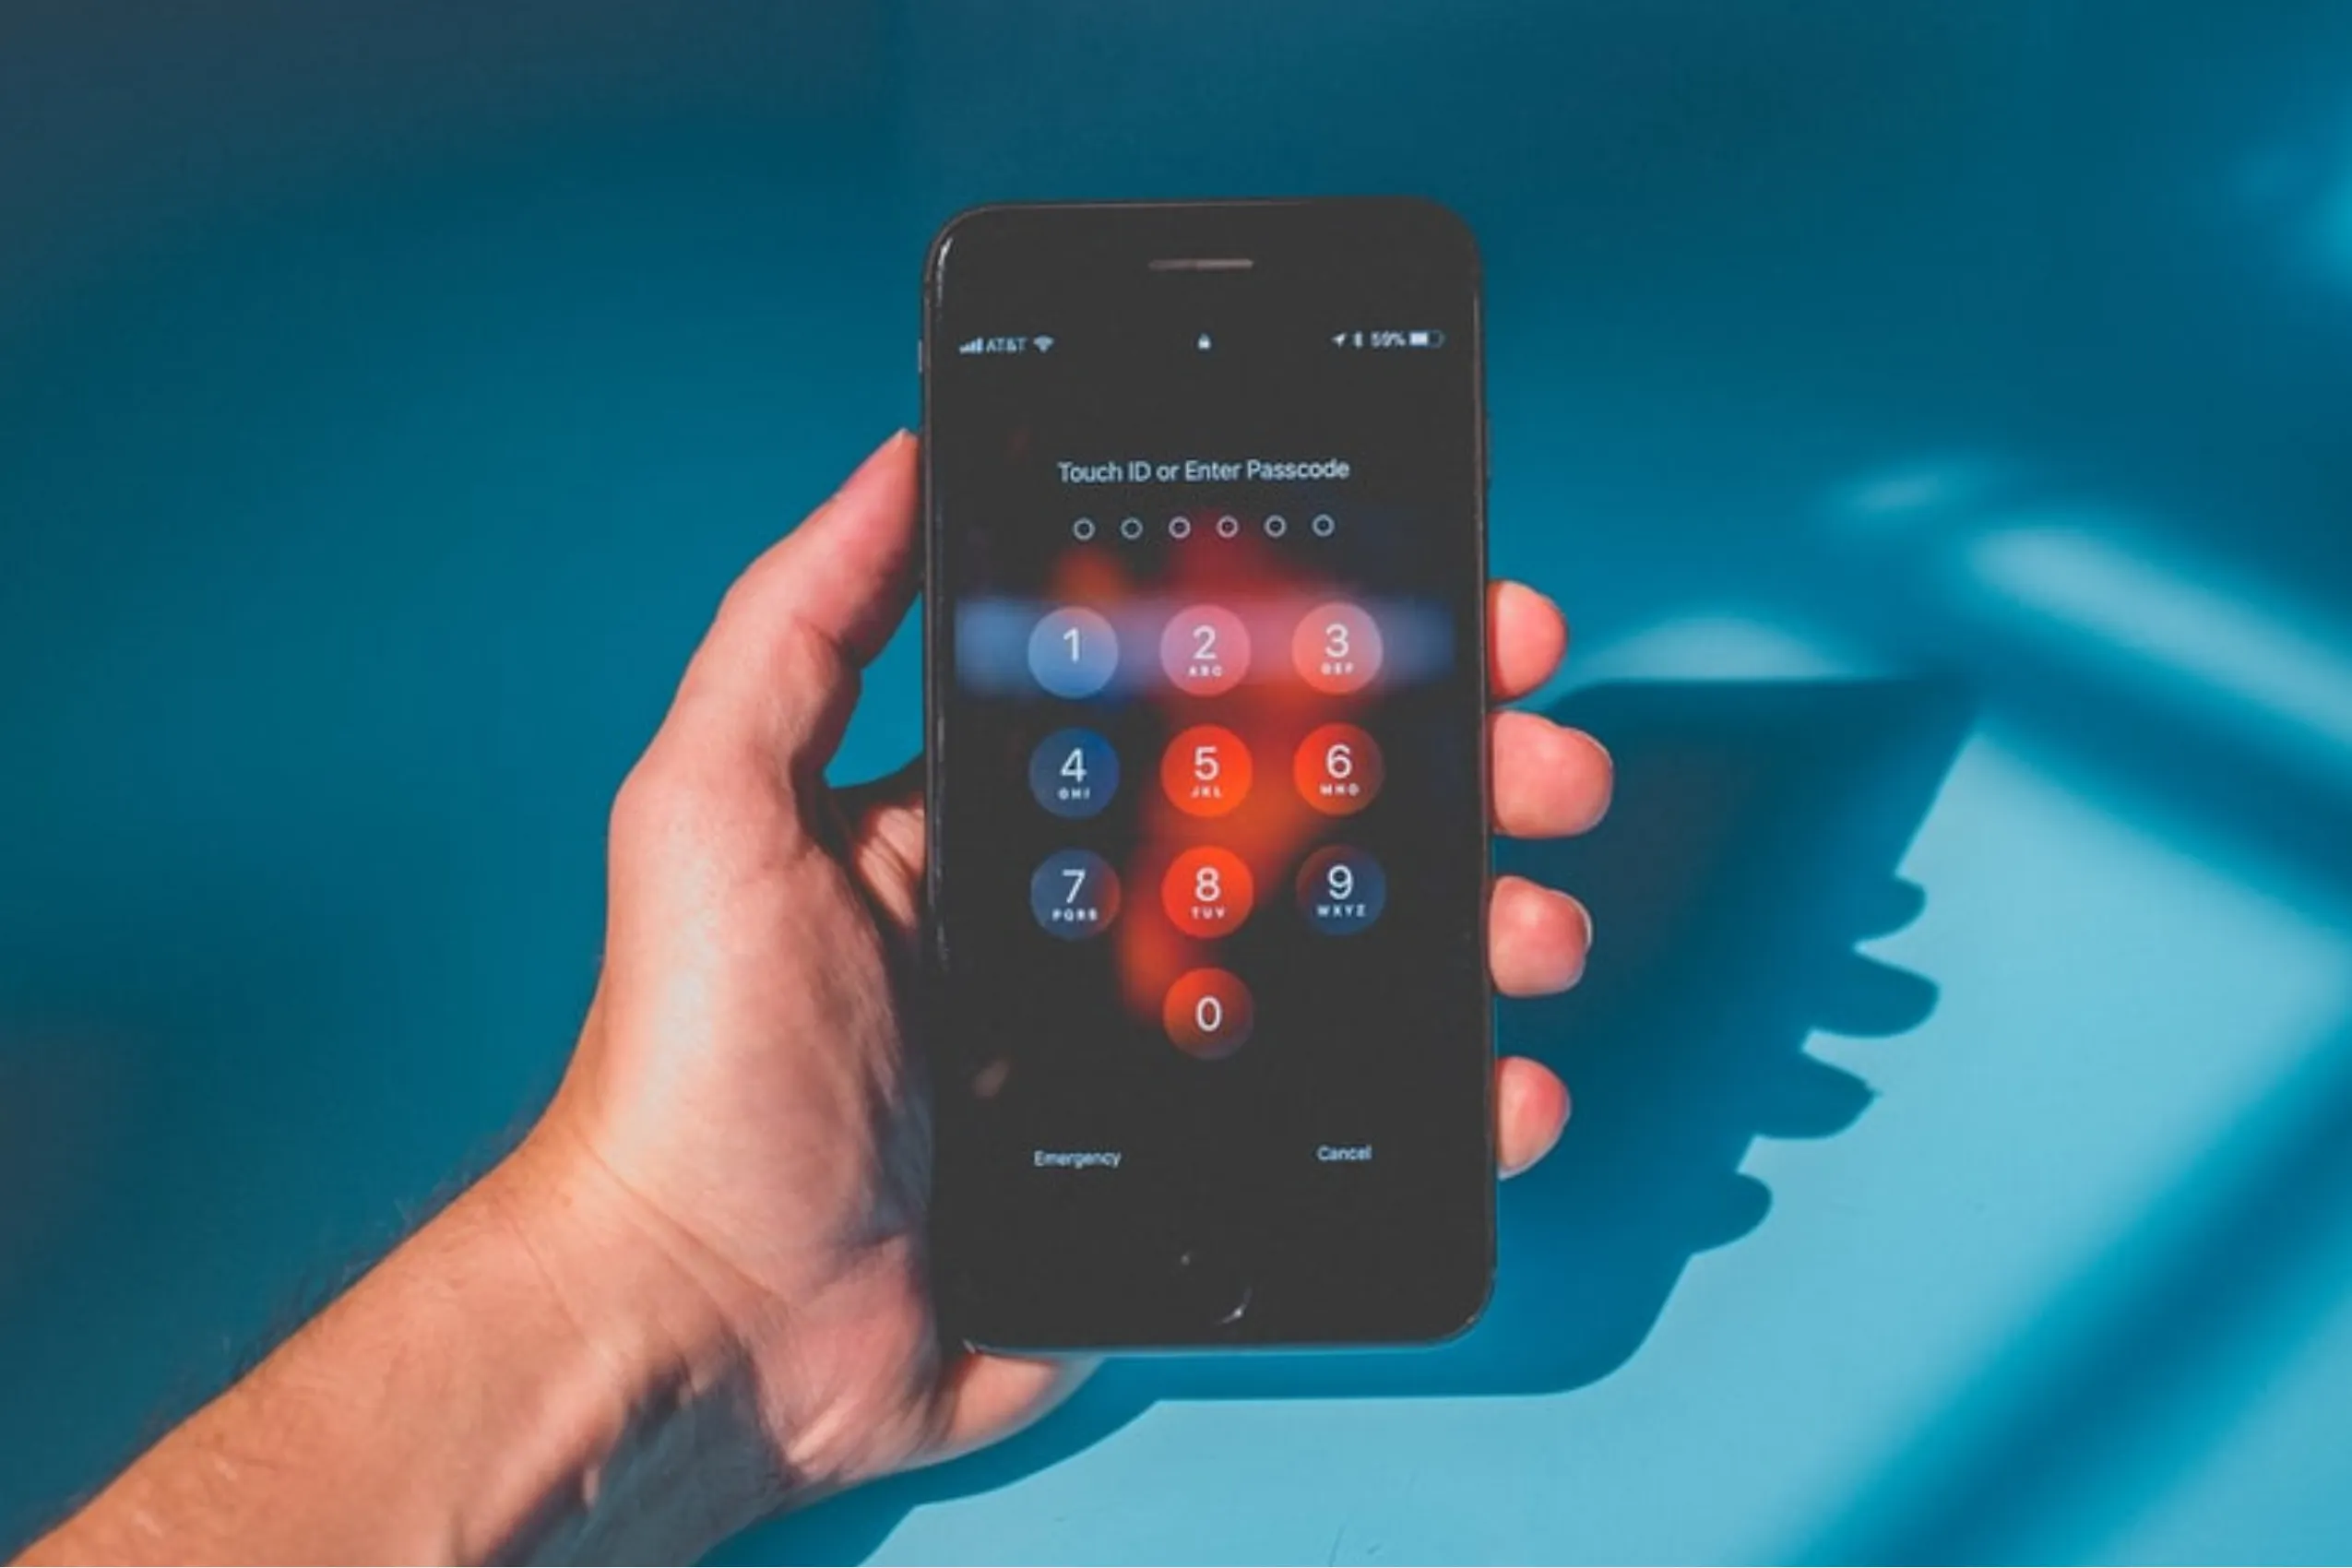 11 Mobile Security Tips to Keep Your Device Safe - Lock Screen